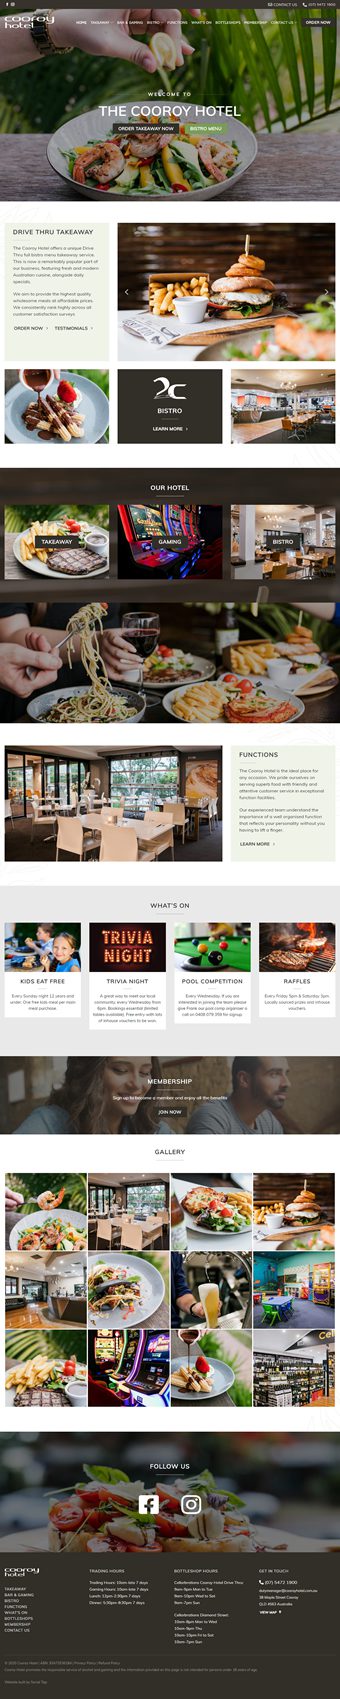 Our Work Hospitality Tourism Website Design Cooroy Hotel